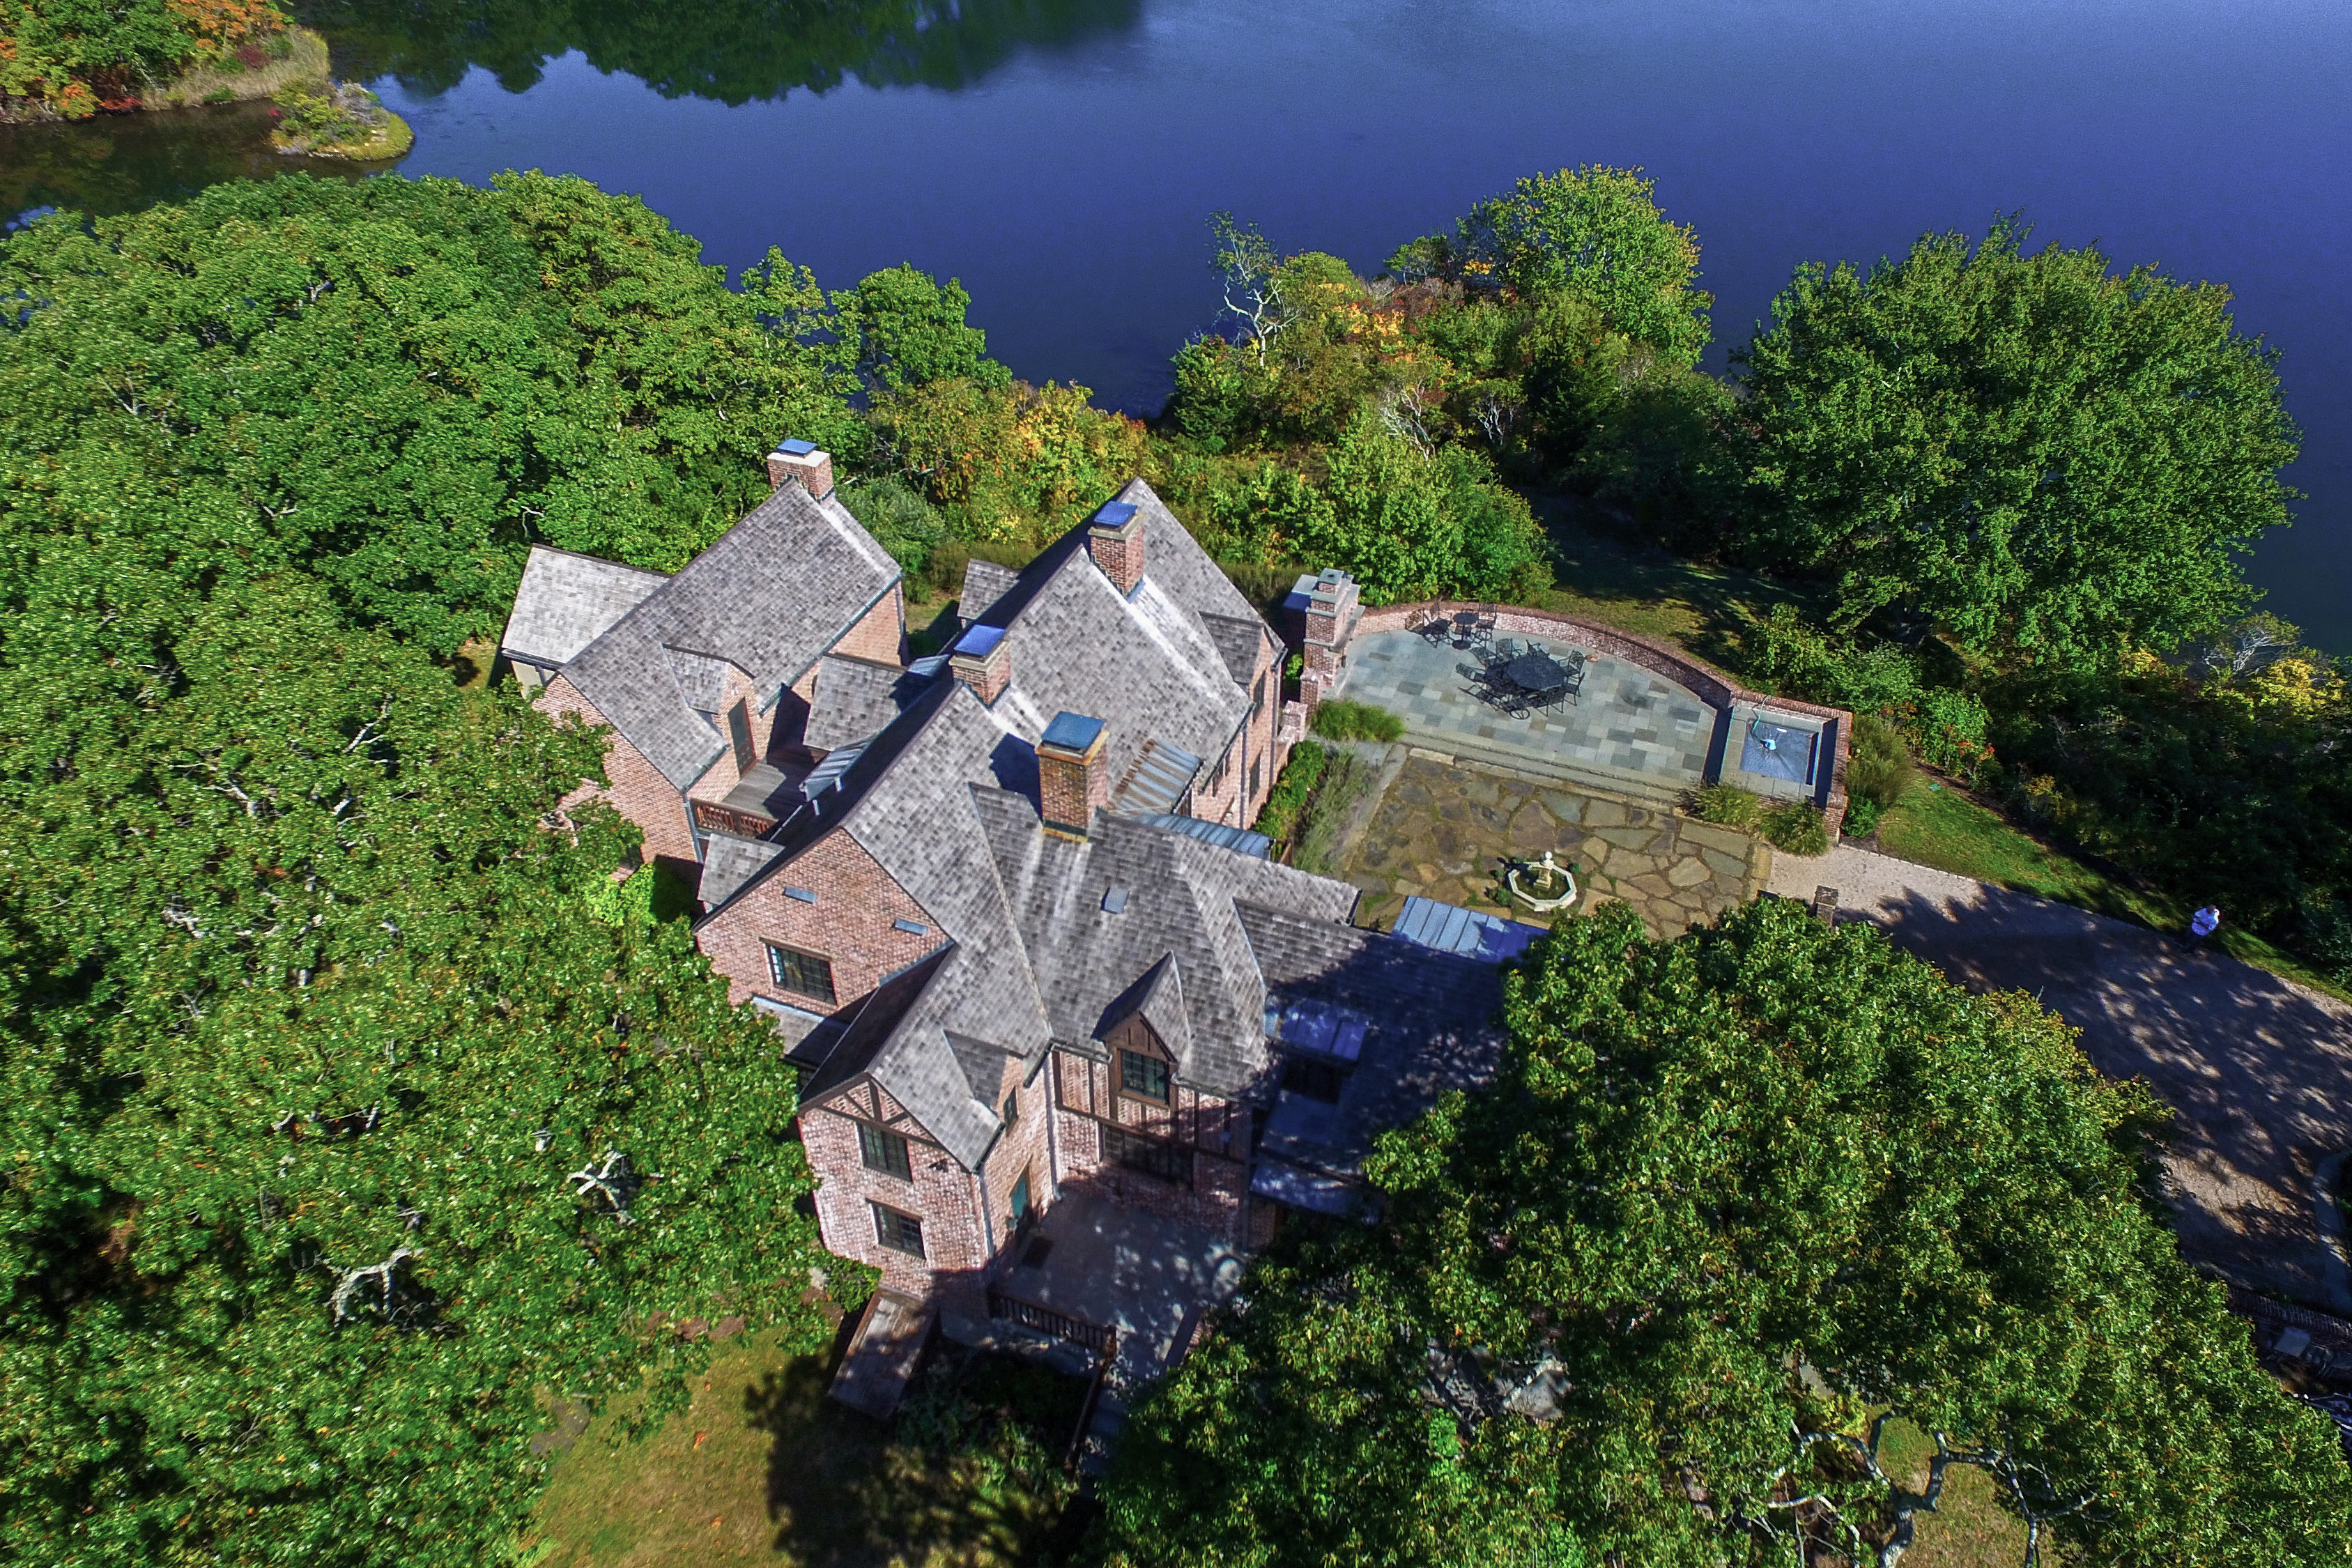 Record Sale in Charlestown: Waterfront Estate on Ninigret Pond Sells for $4.025M